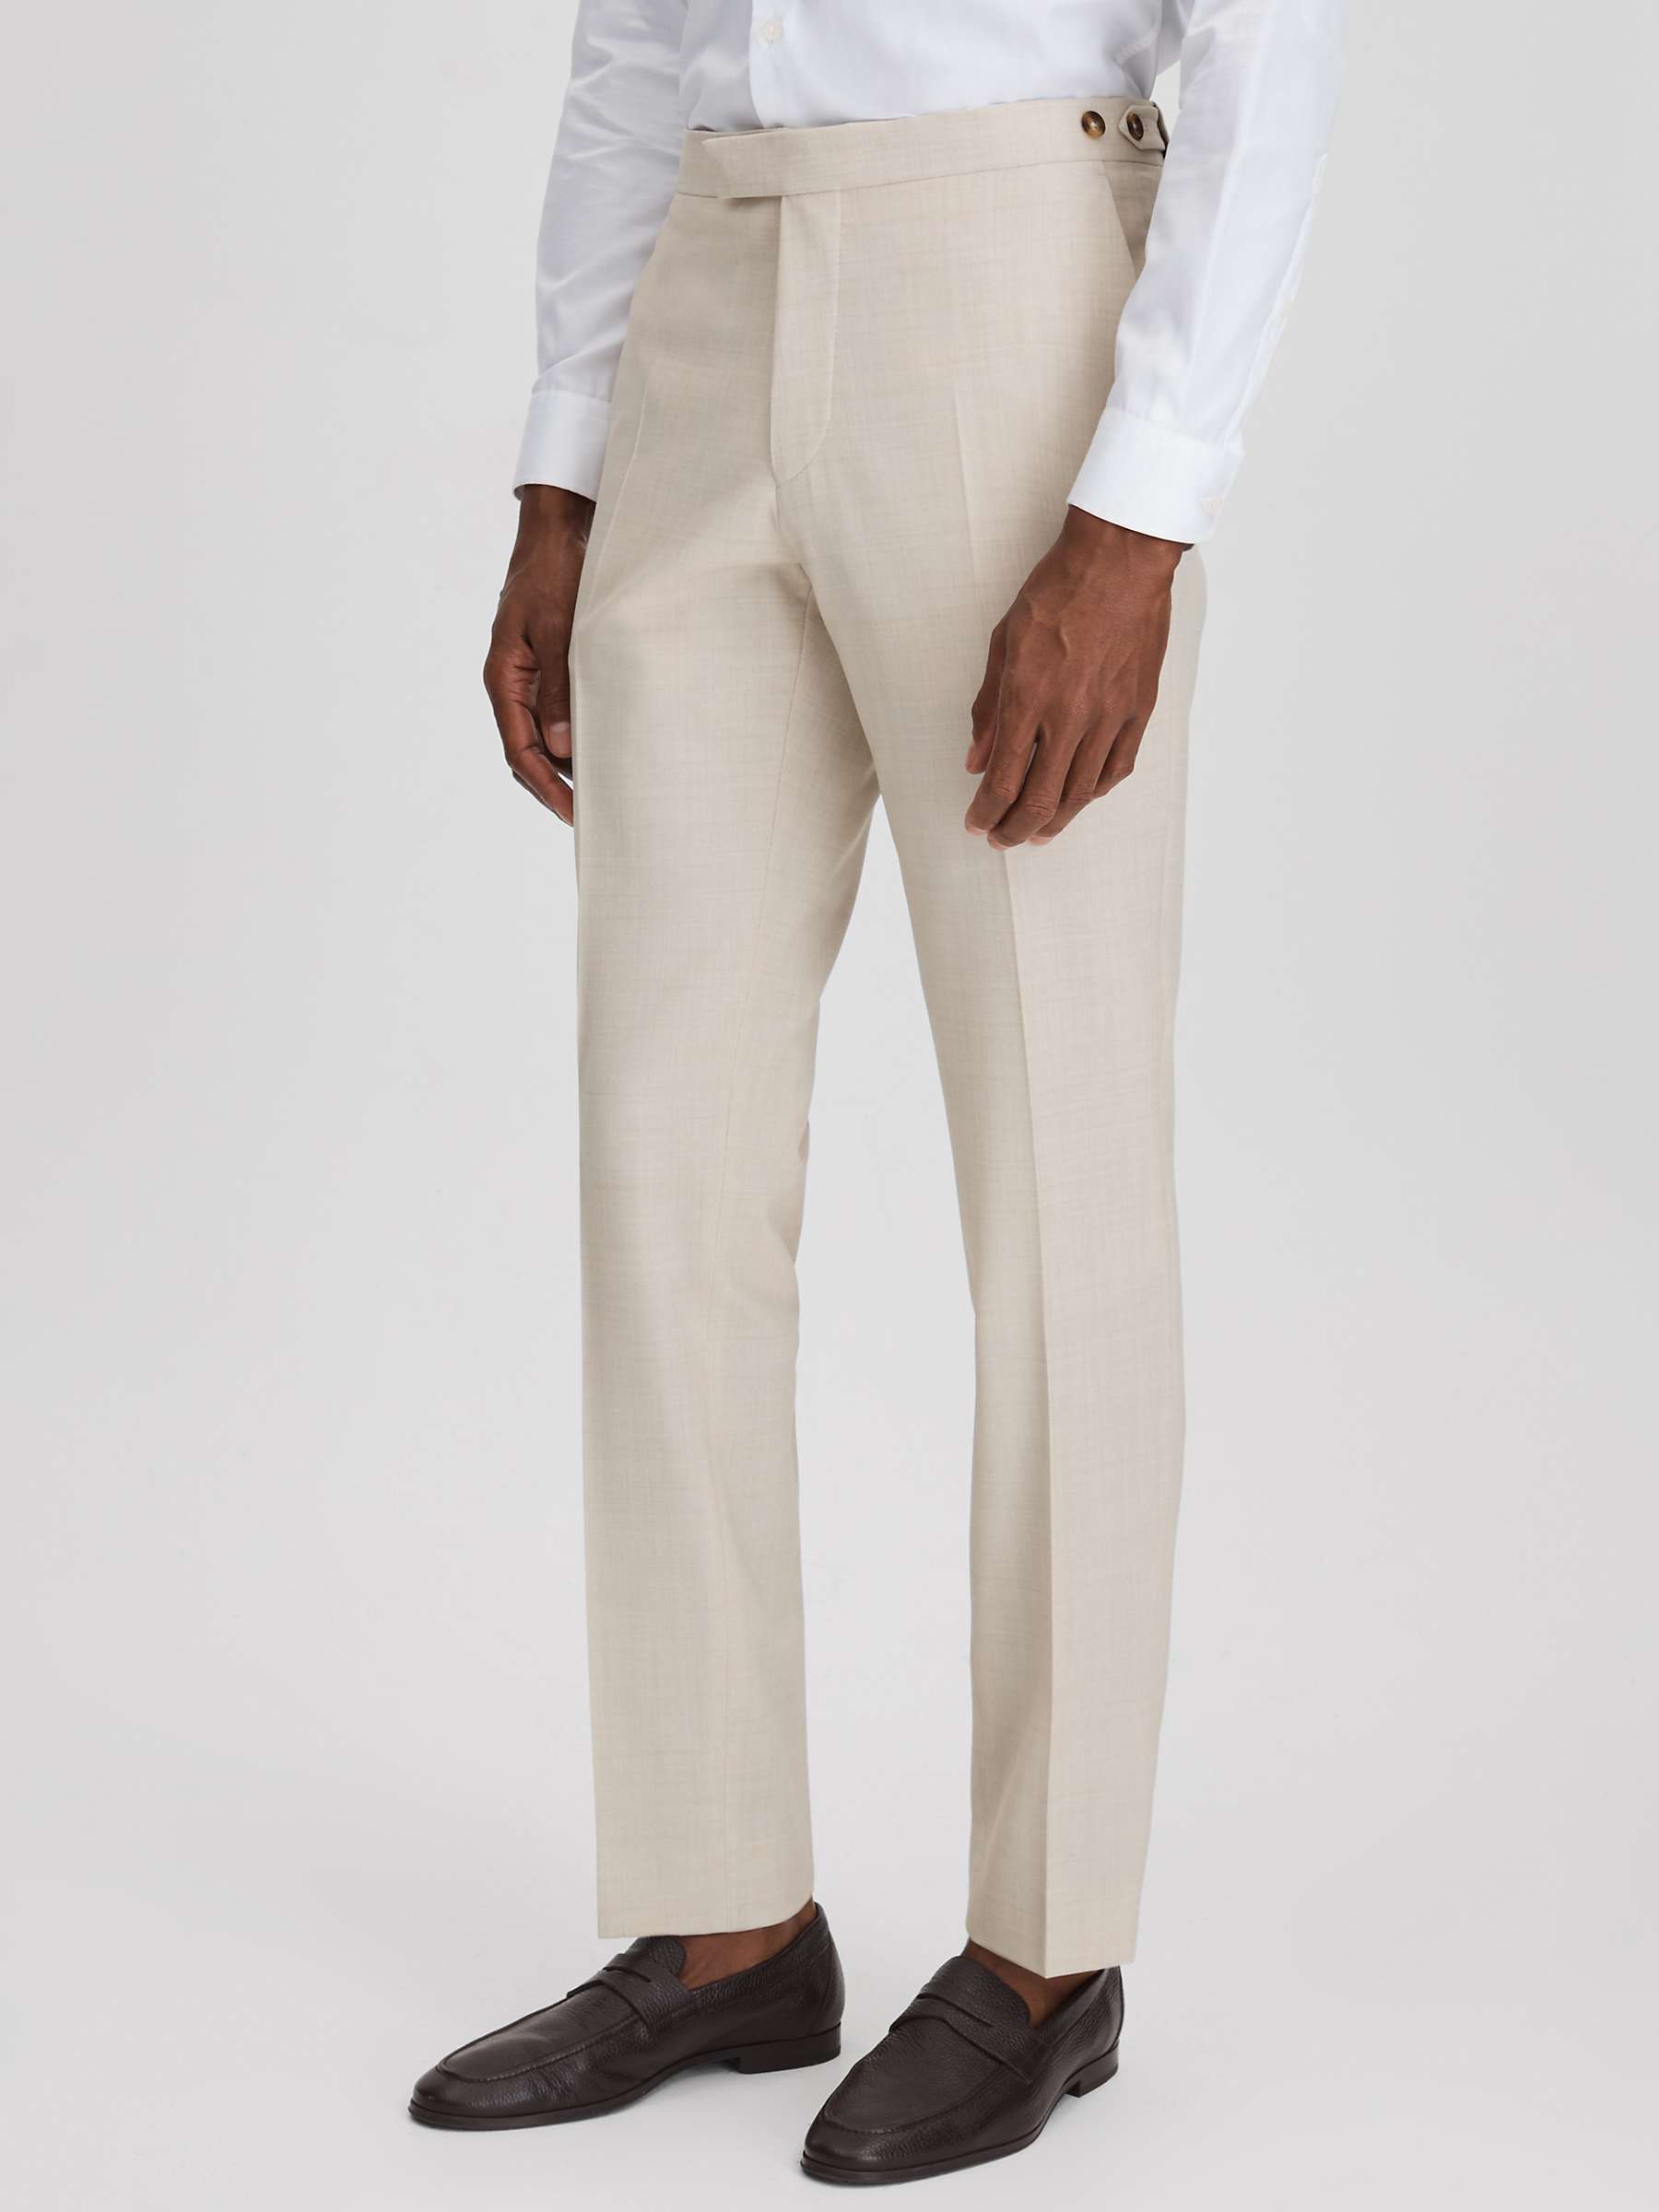 Buy Reiss Belmont Wool Blend Textured Weave Trousers, Stone Online at johnlewis.com